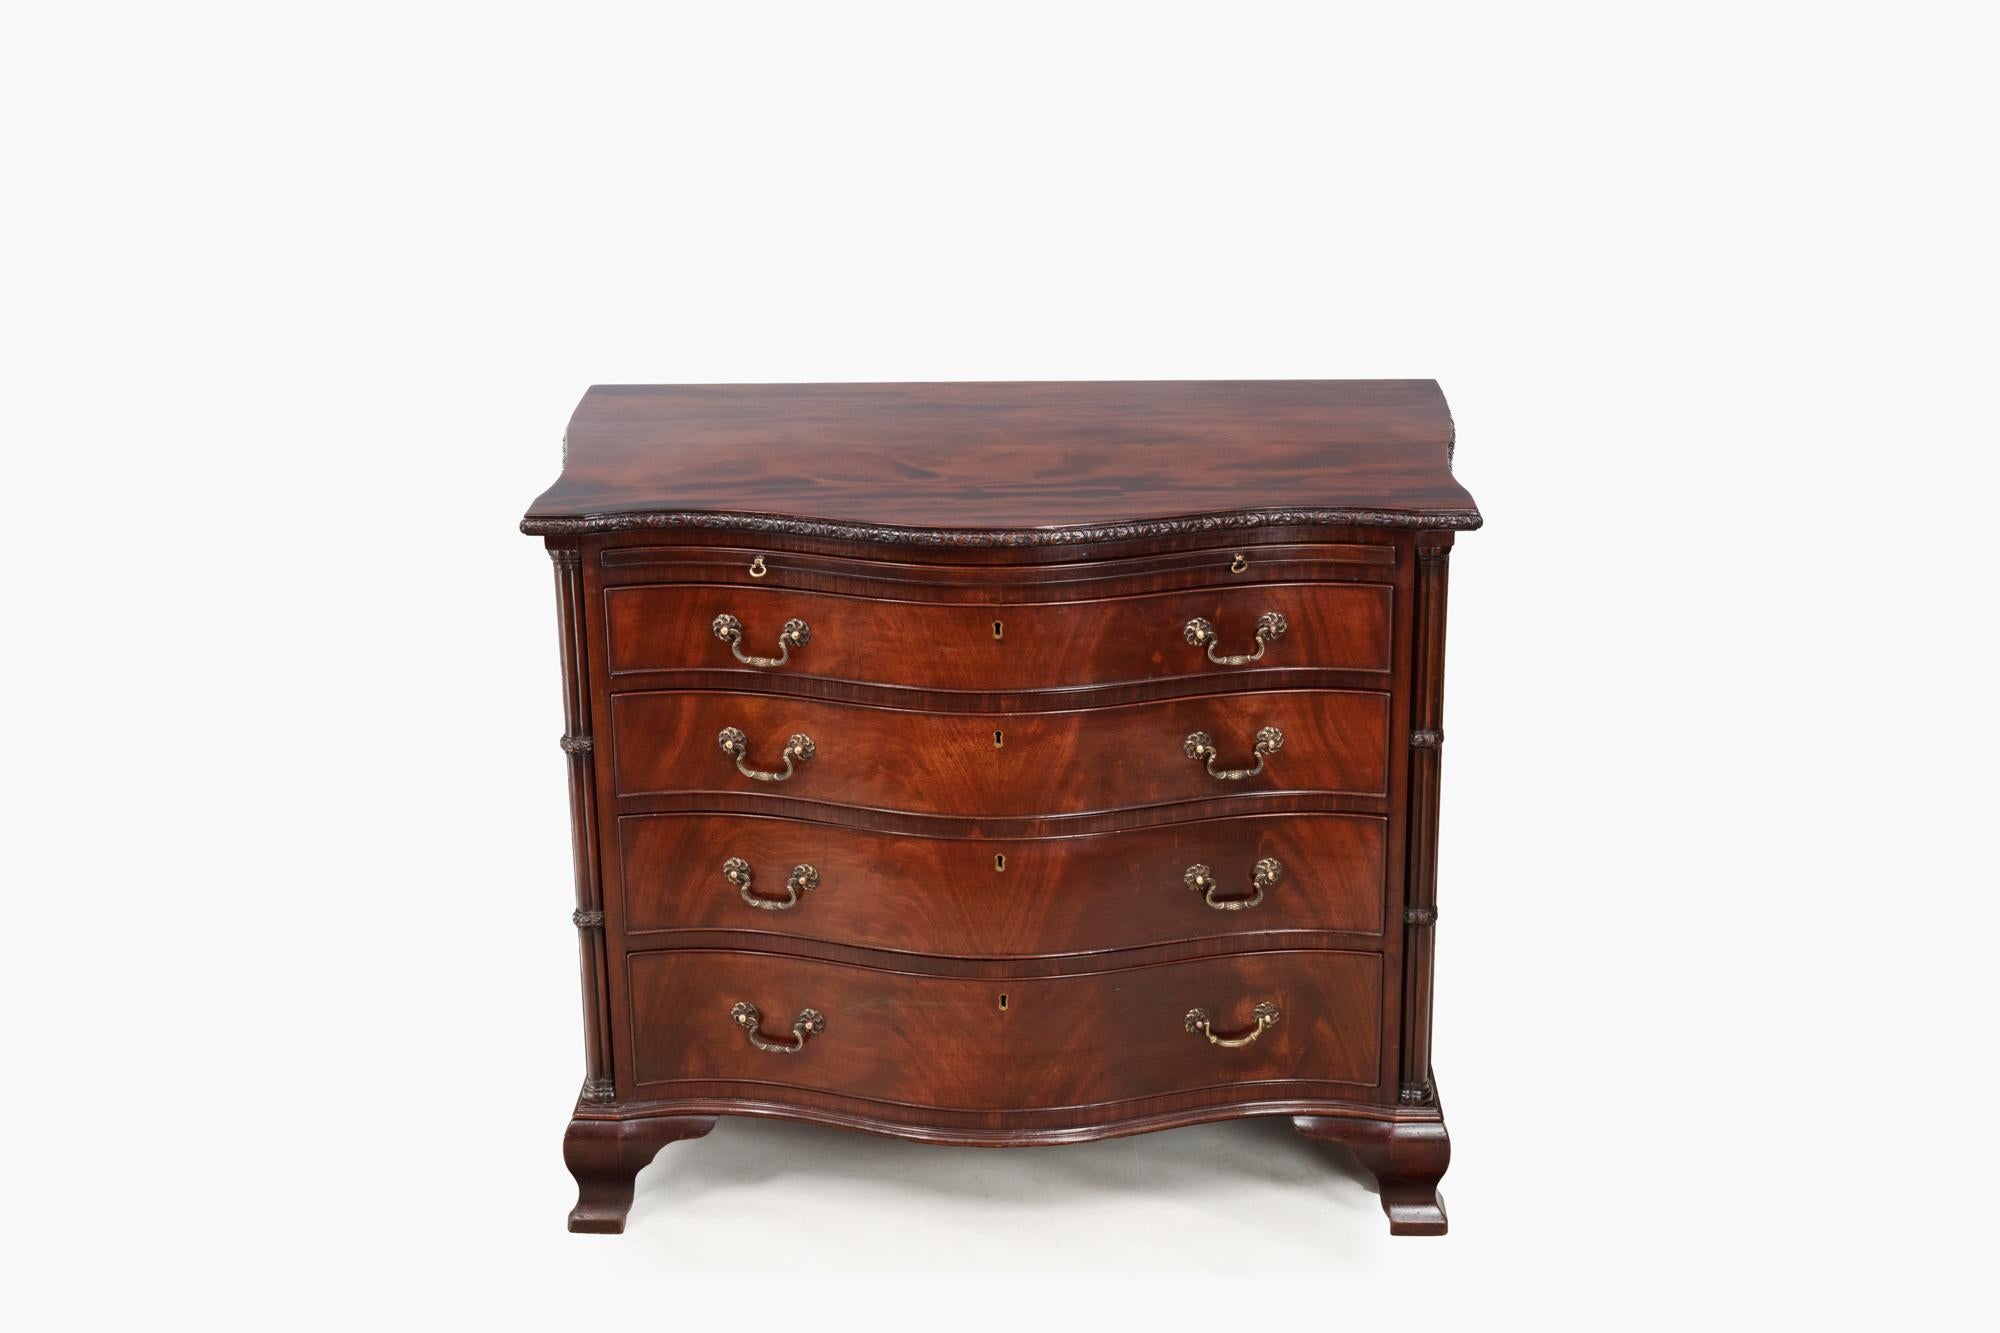 19th Century mahogany serpentine chest of drawers with carved molded top edge and cluster column detail. A full-length brush slide sits above four long drawers which are flanked on either end by the carved cluster columns. The piece is complete with